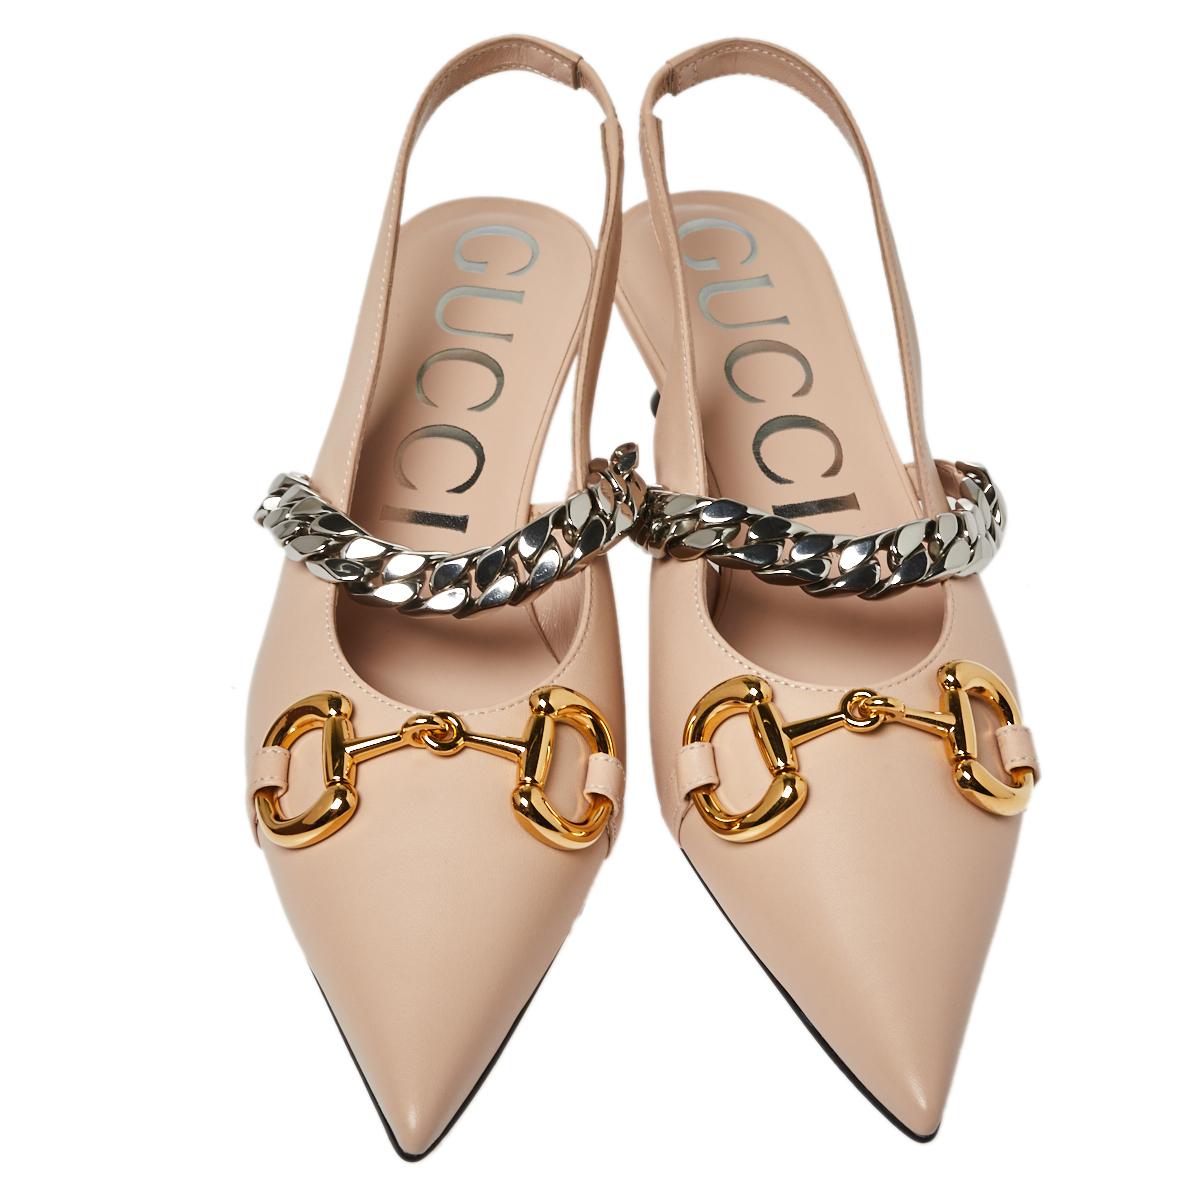 Simply luxe, these sandals from Gucci will help you stay comfortable throughout the day! The beige sandals are crafted from leather and designed with pointed toes and slingbacks. They flaunt chain & Horsebit detailing on the uppers and come equipped